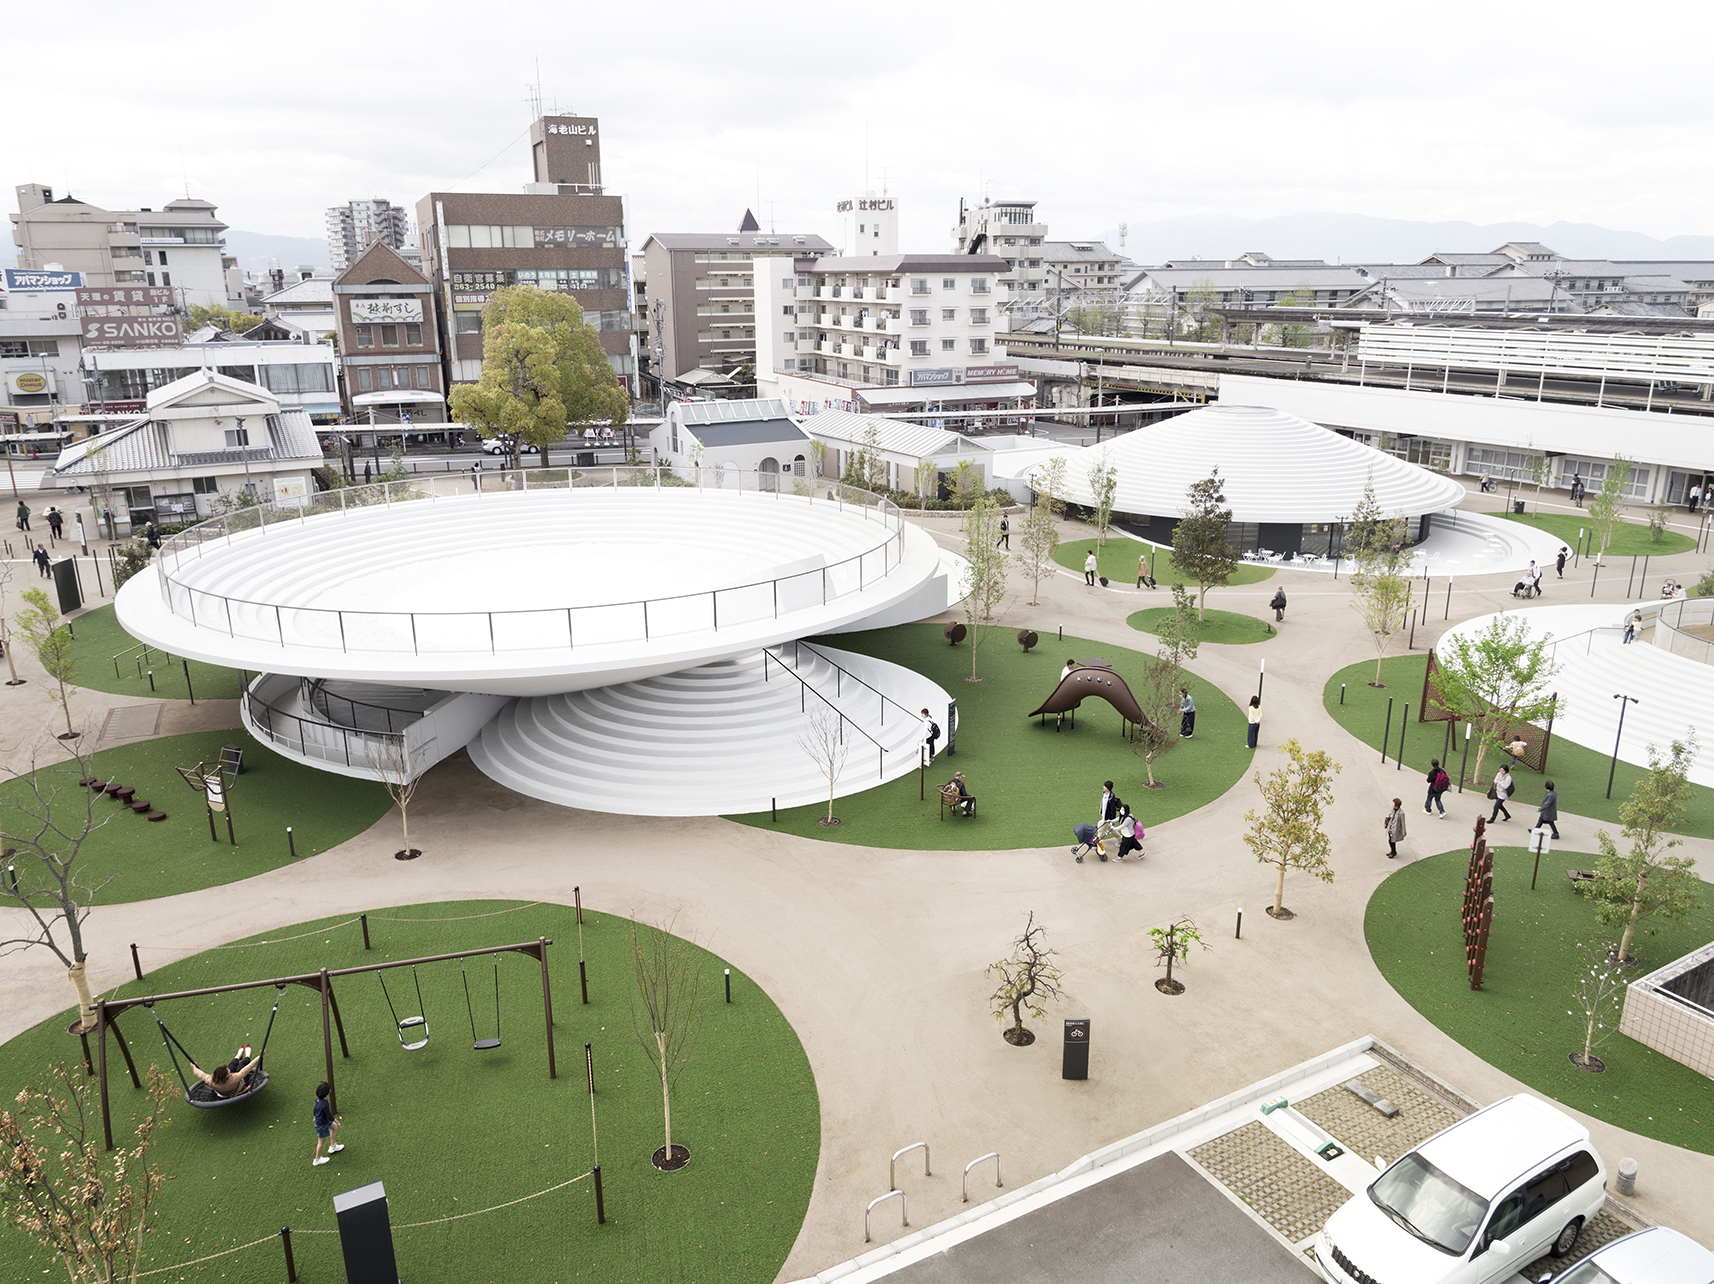 A semi-areal view of Tenri Station Plaza CoFuFun showcasing the circular pavilions and activity zones.